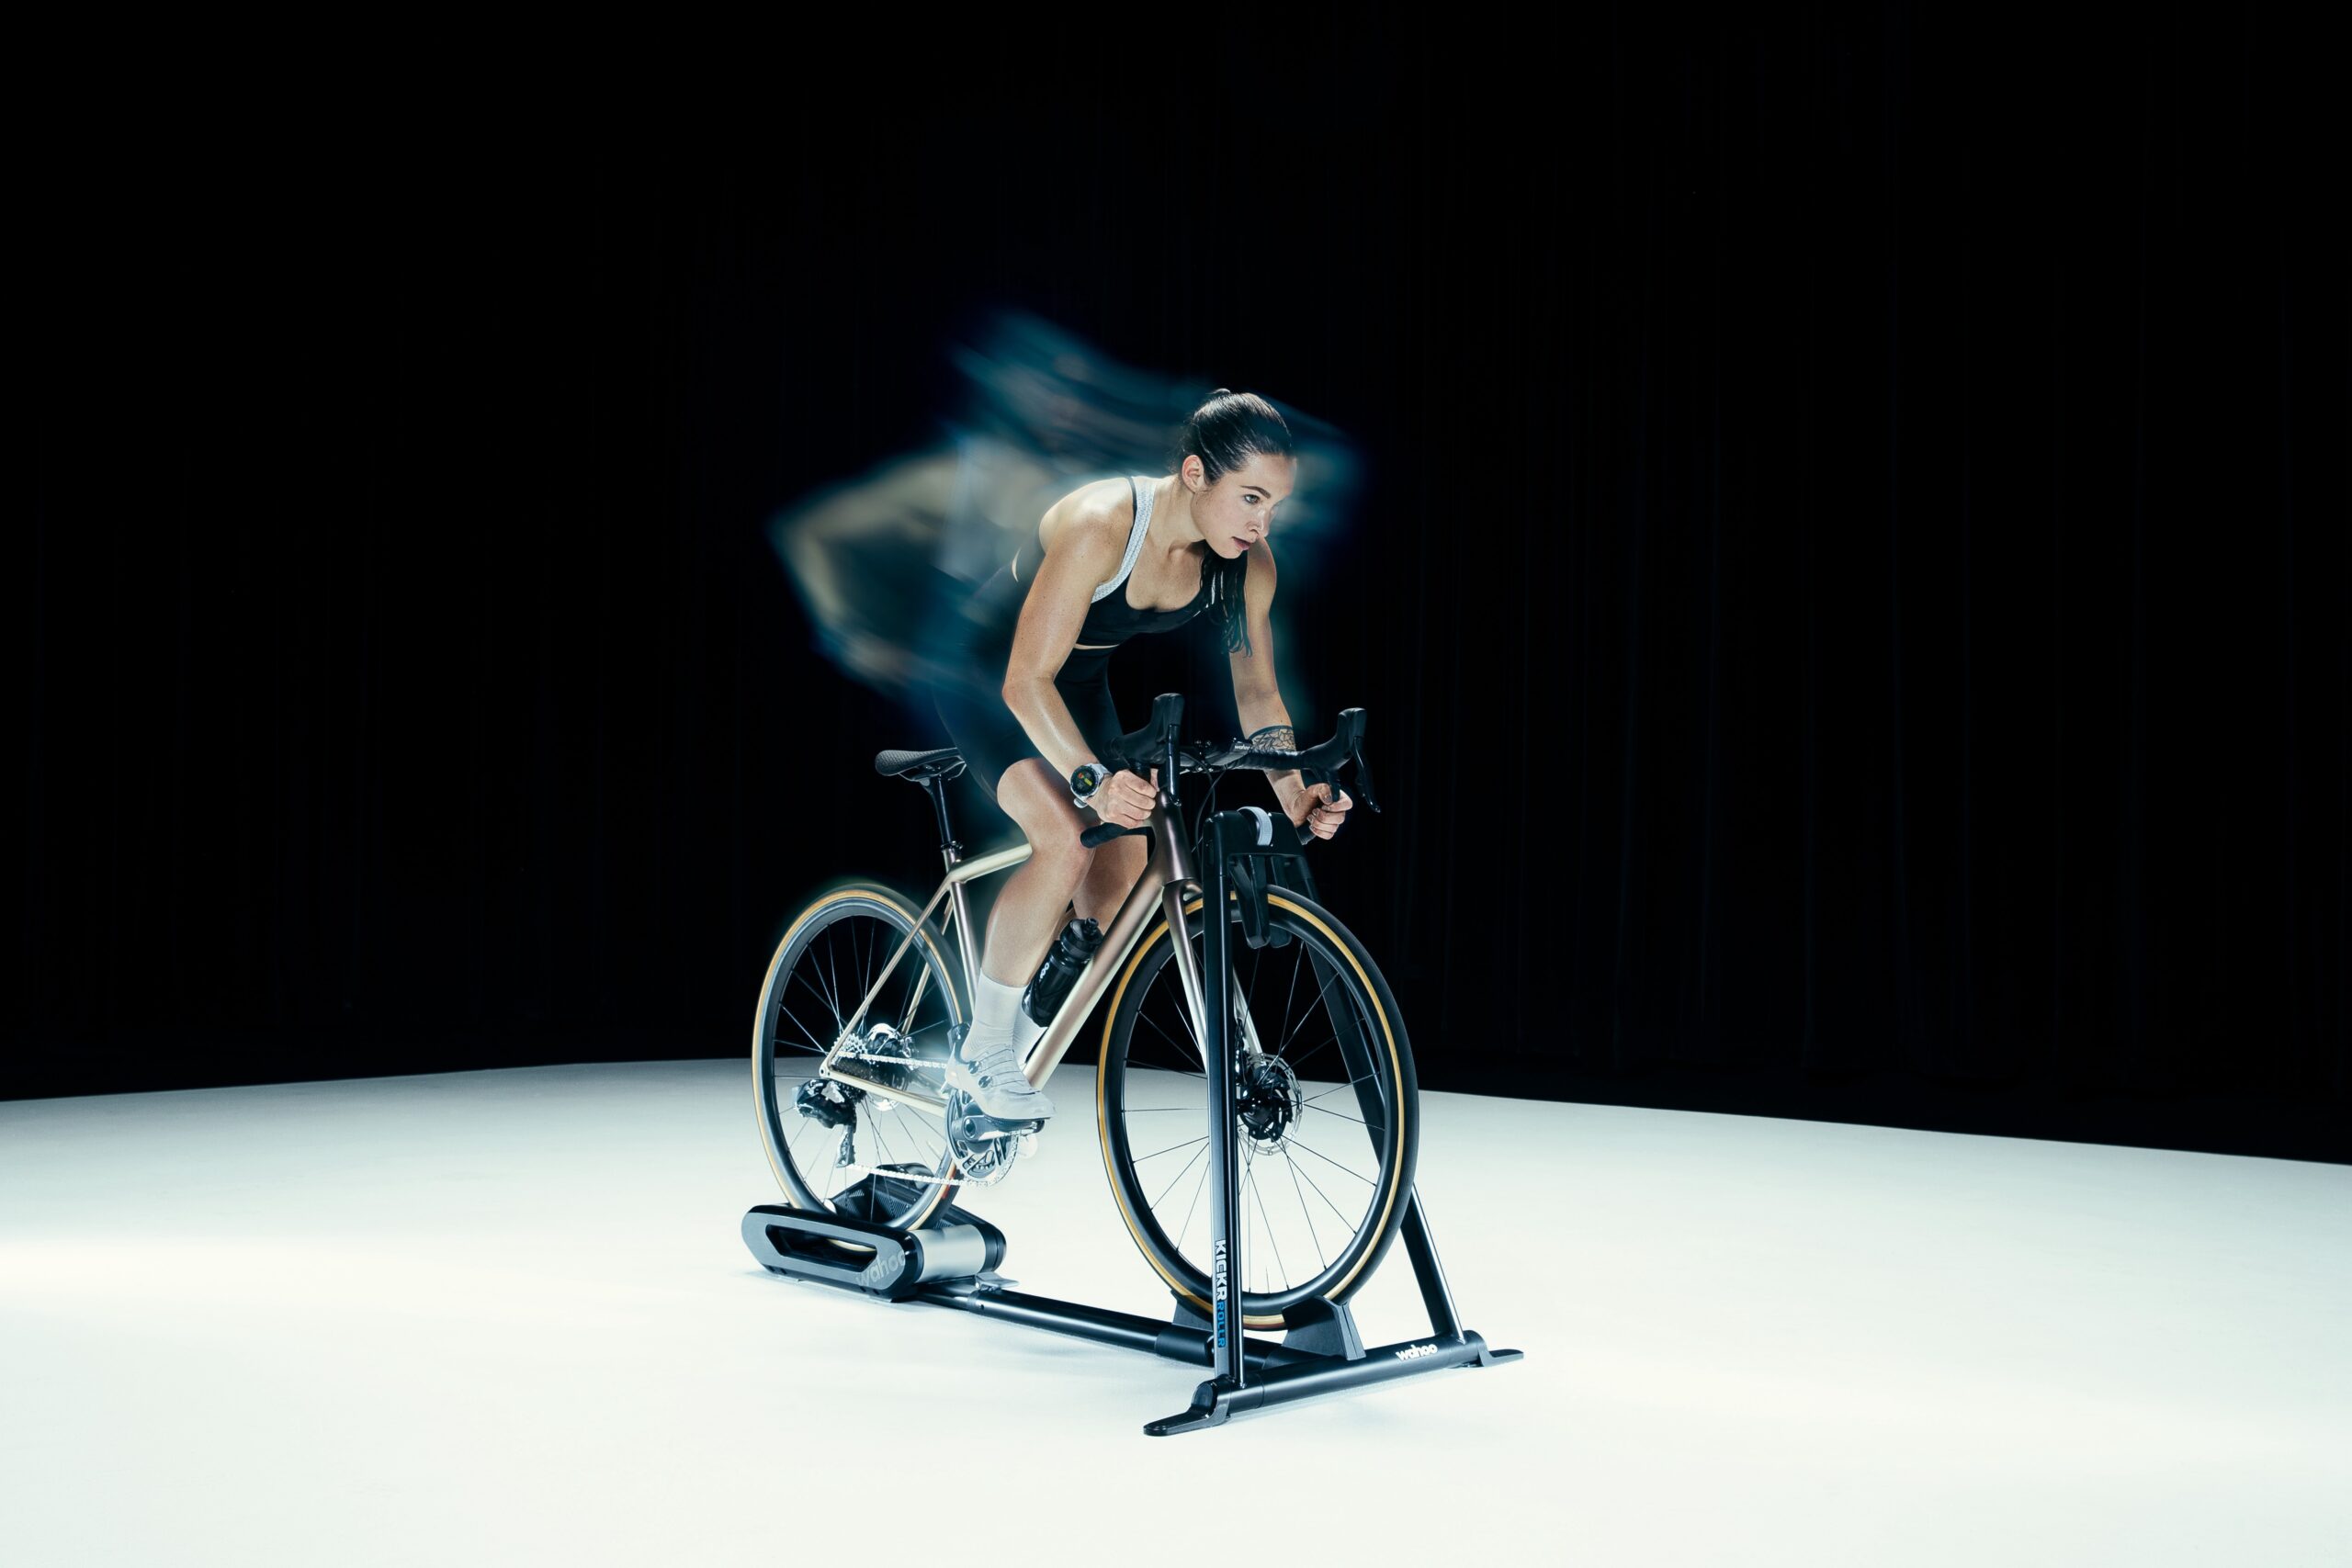 This smart bike training gadget turns your bicycle into a fitness machine